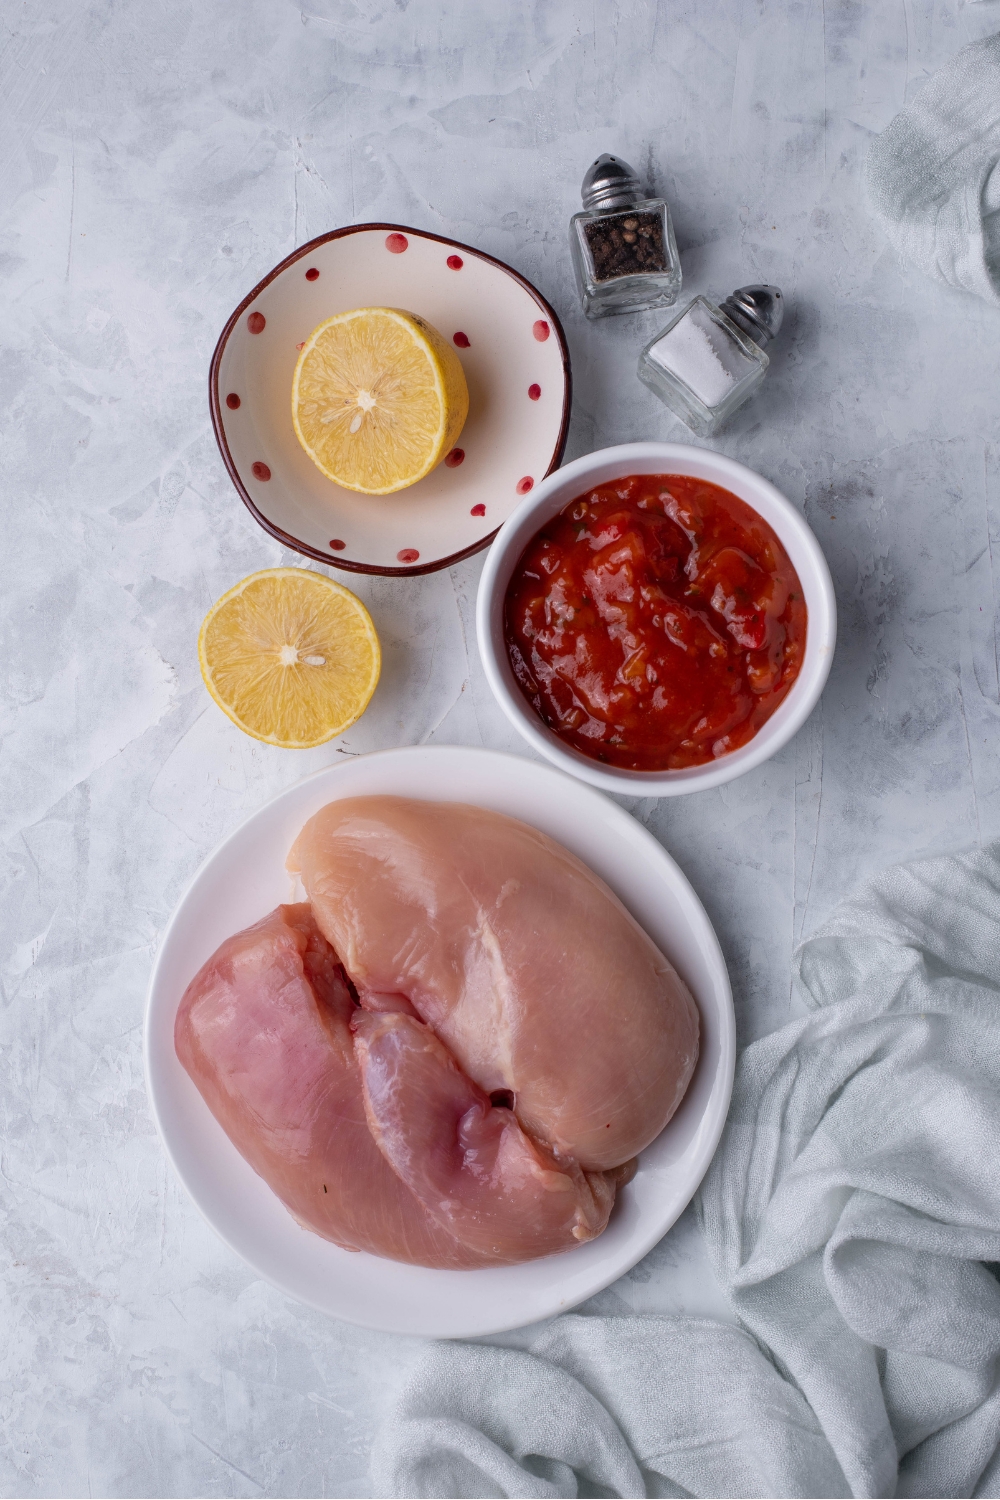 An assortment of ingredients including a plate of raw chicken breast, a bowl of salsa, salt and pepper shakers, and a lemon cut in half with one half in a bowl and one half on the counter.